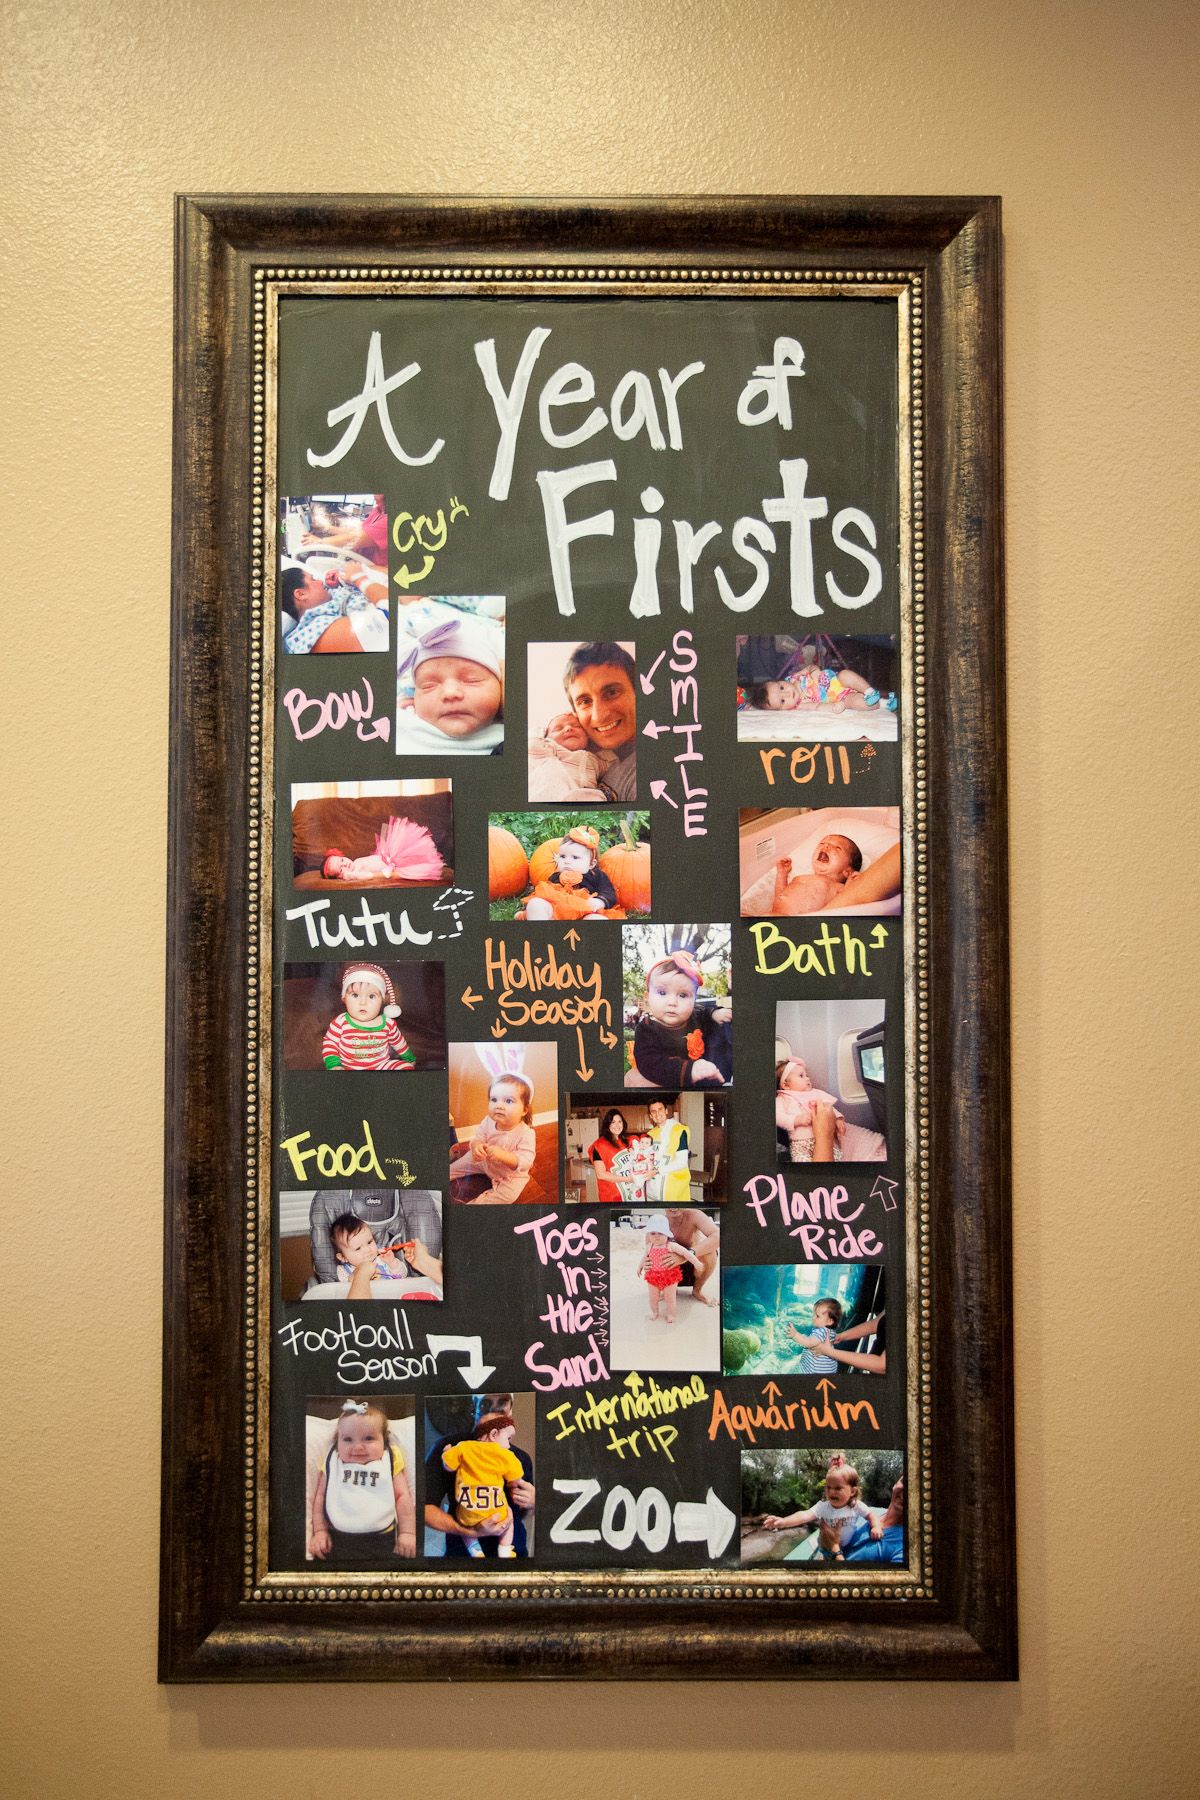 Year of firsts to showcase your child's milestones during the first year. I